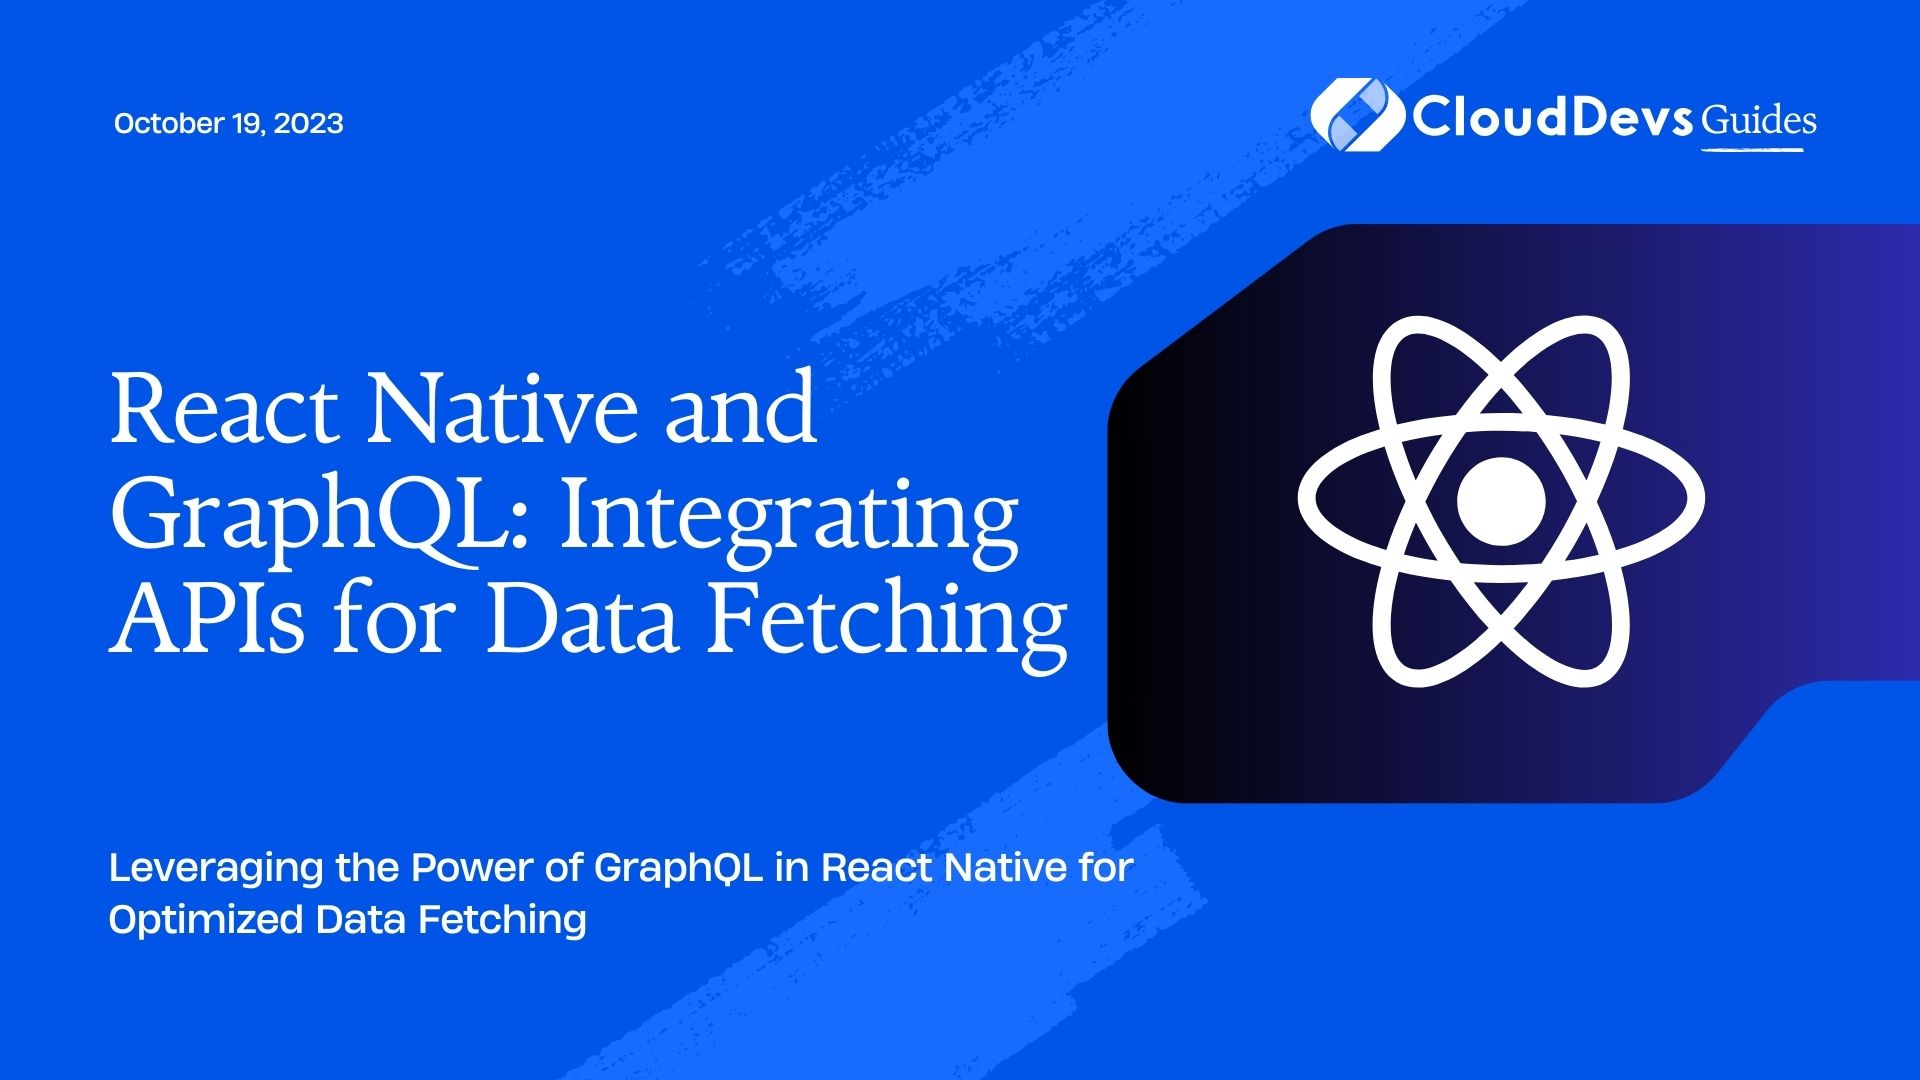 React Native and GraphQL: Integrating APIs for Data Fetching